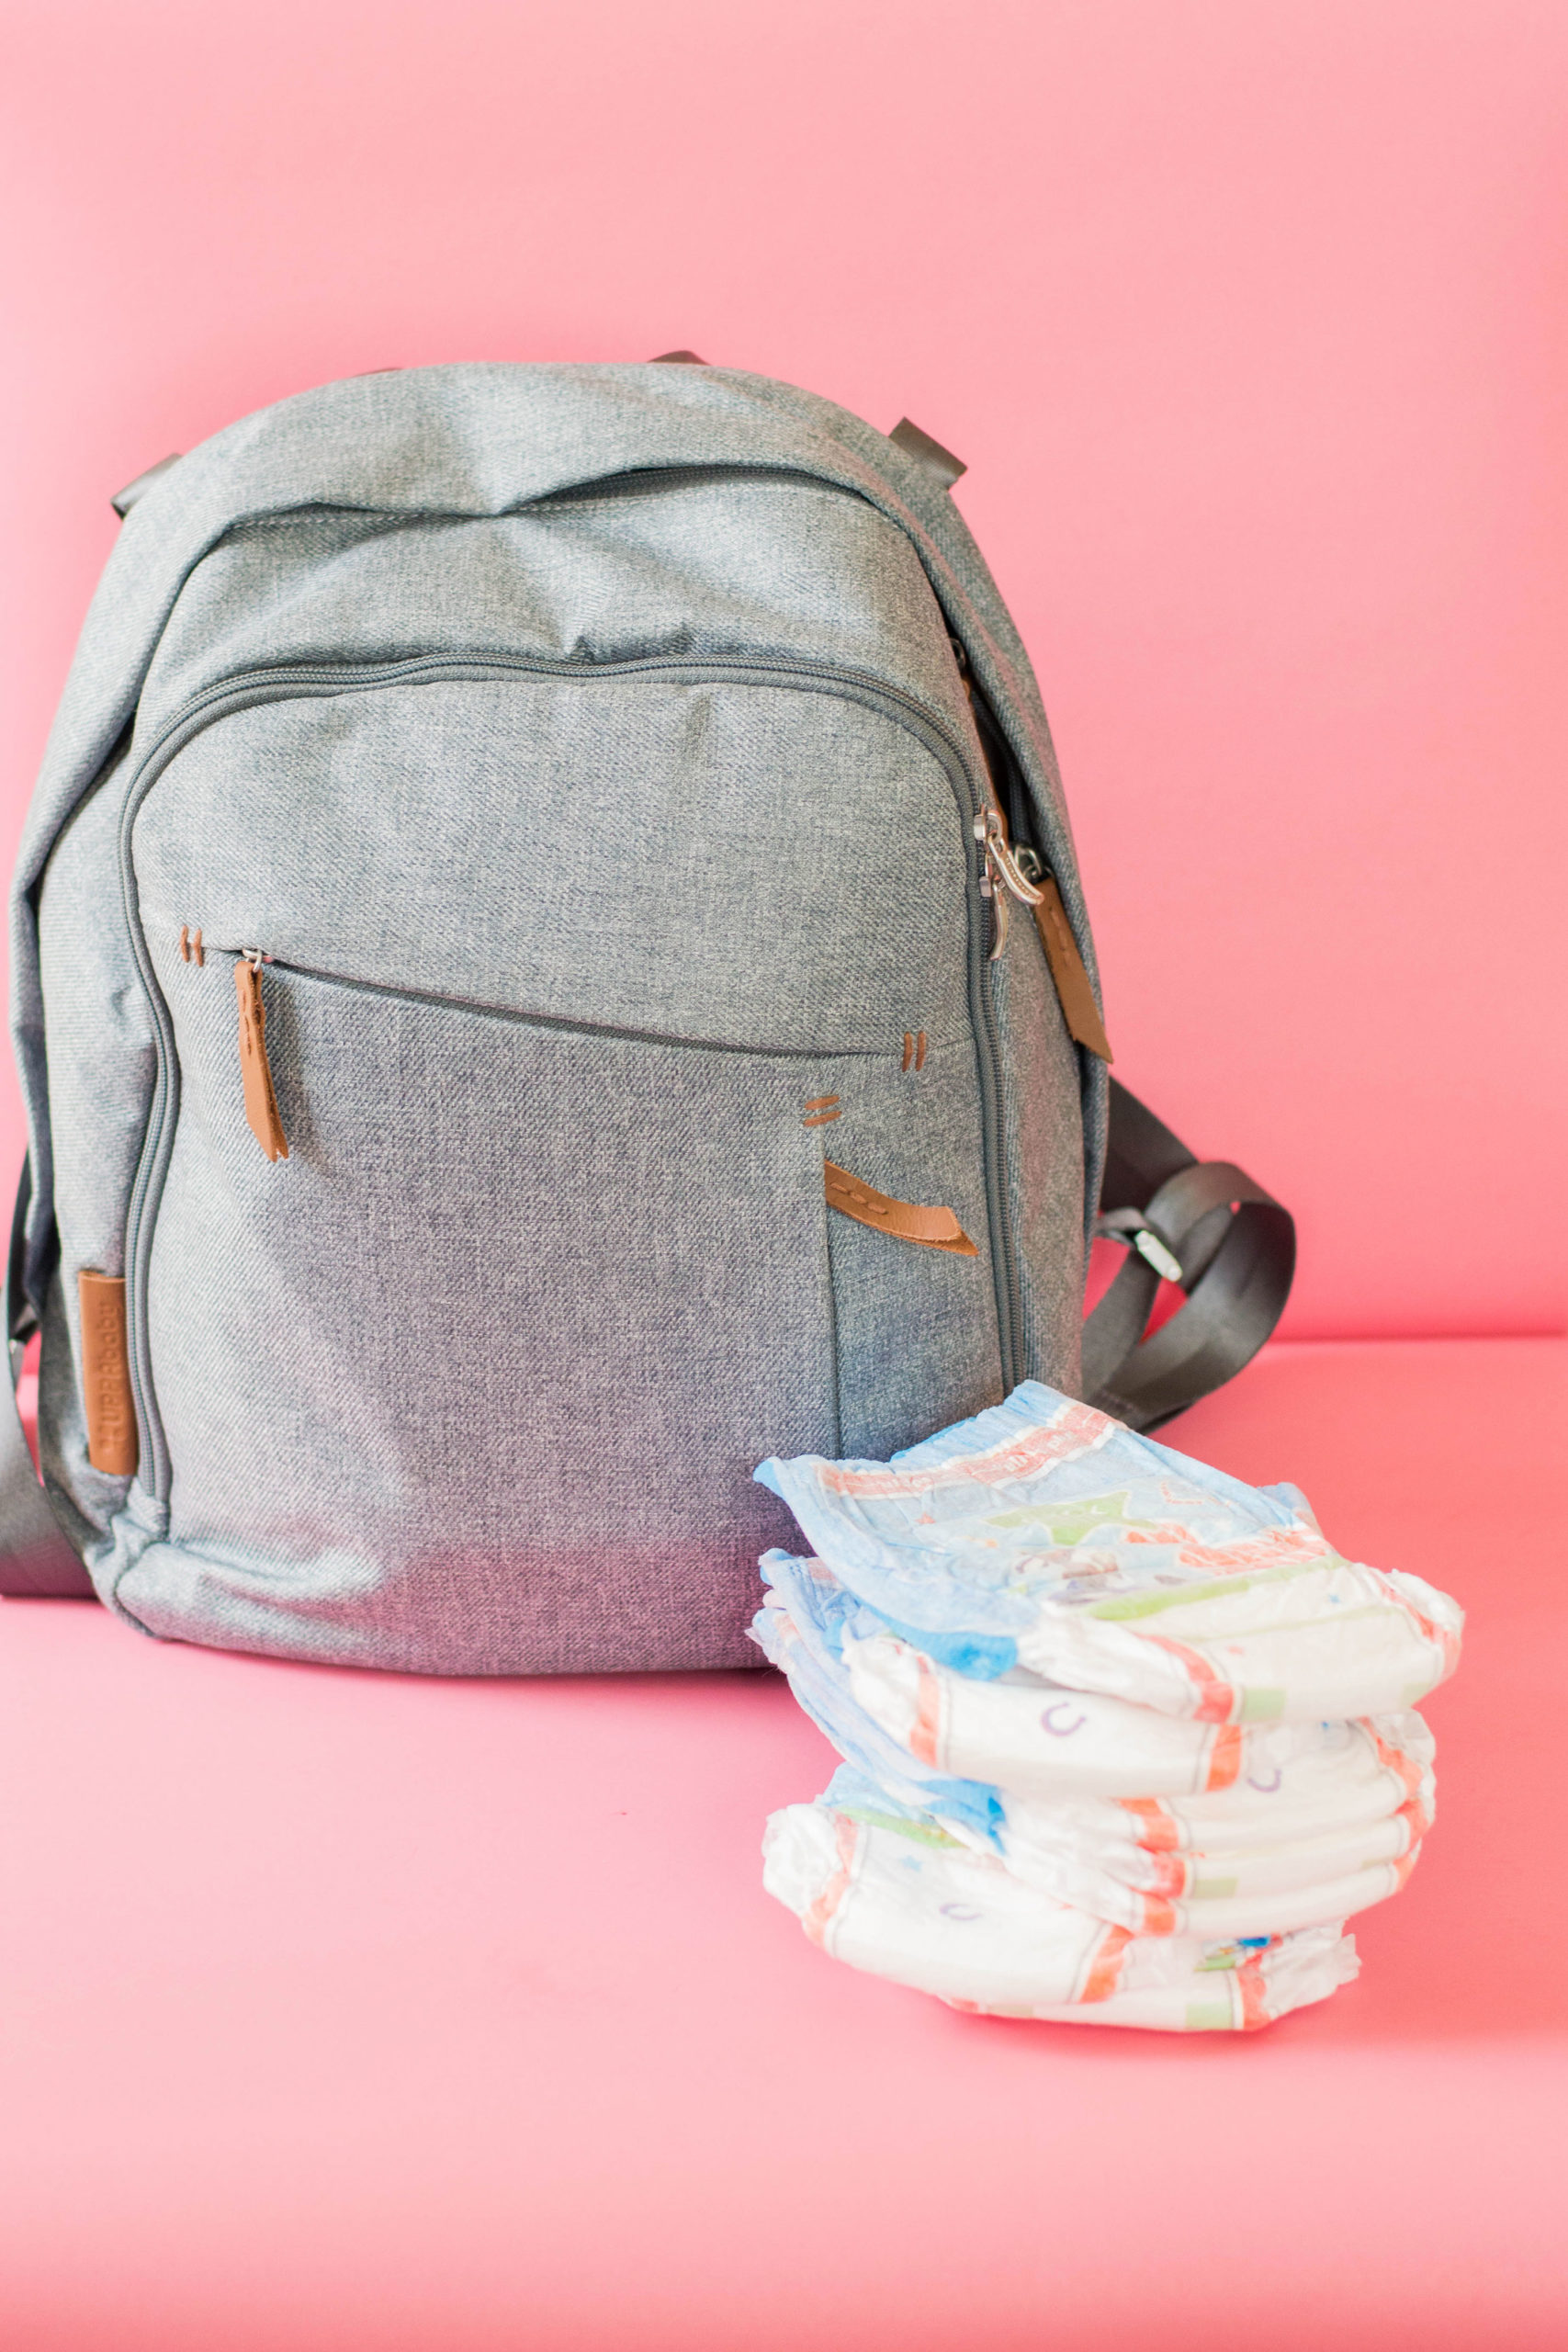 What are the things you have to take with you on your next adventure with your toddler? Don't stress too much! We got you covered with our list of diaper bag essentials. #packingdiaperbags